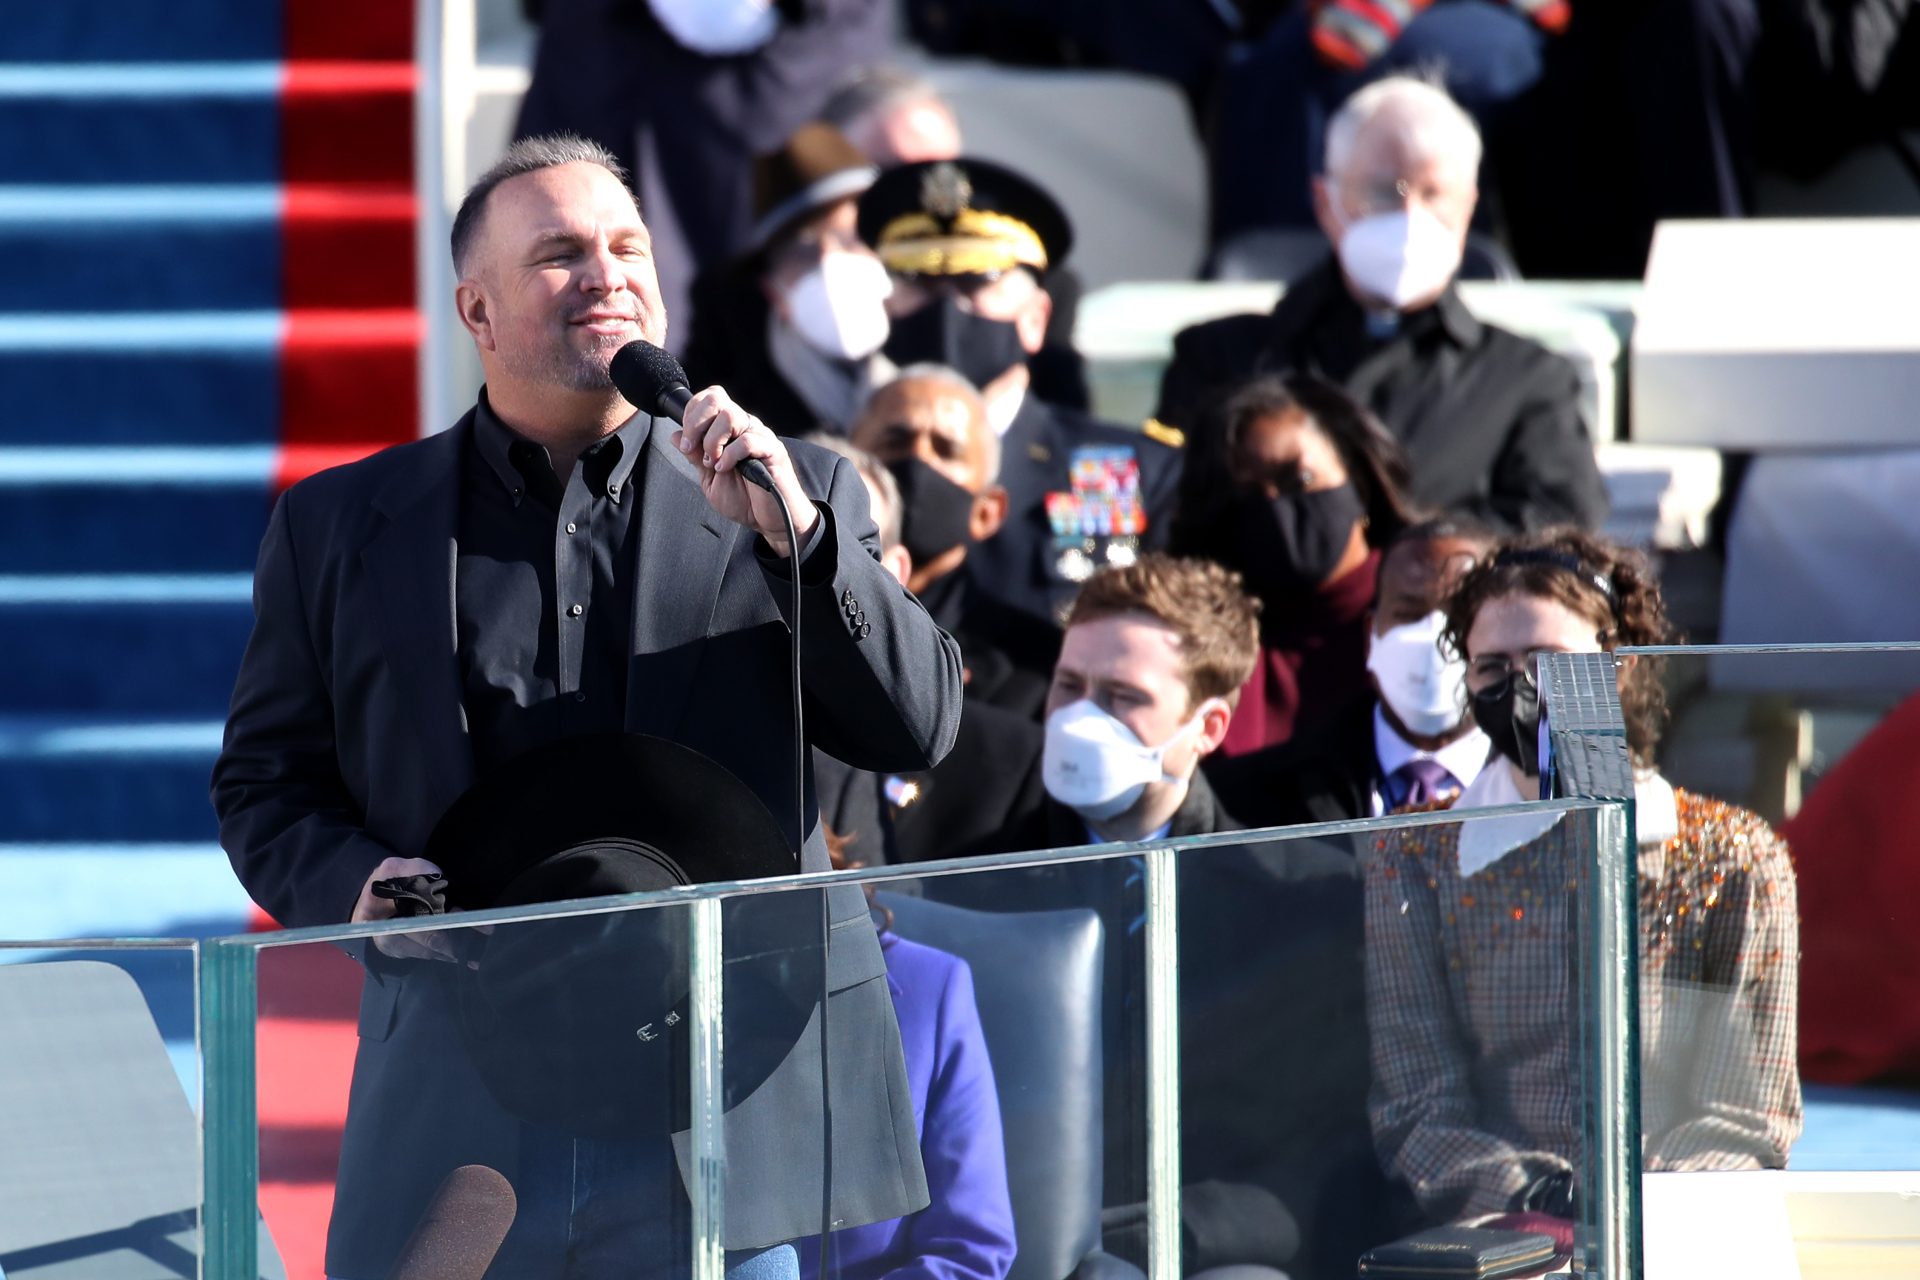 <p>Garth Brooks is a man with a broad support base, and he even sang at Joe Biden's inauguration. The singer surprisingly lists 'Kiss' as one of his influences, and he has successfully welded rock with country music.</p>